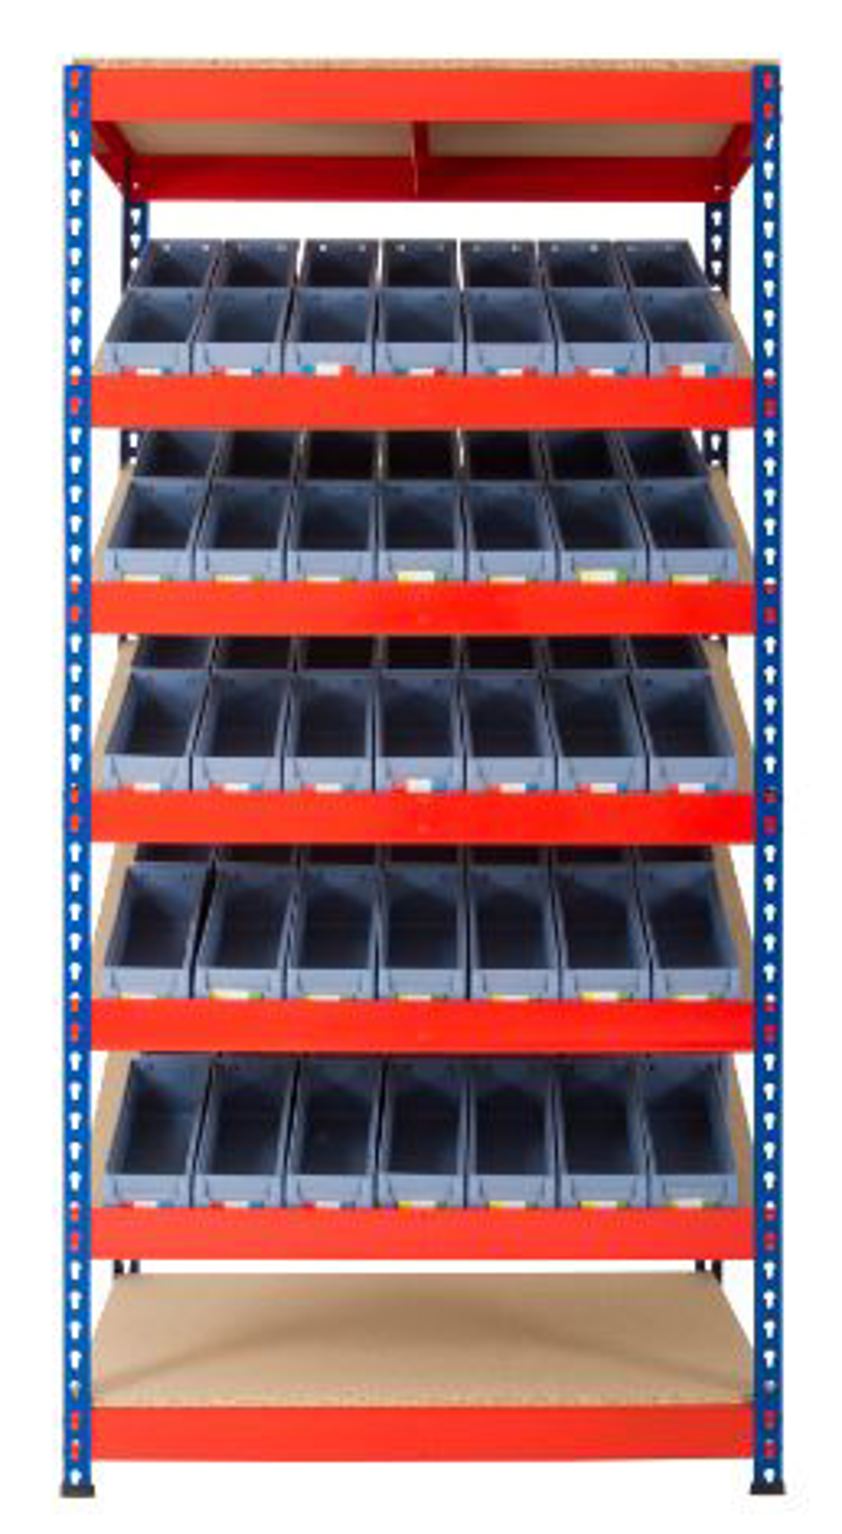 Kanban Shelving with Shelf Trays - (1830 x 915 x 610) for Garages